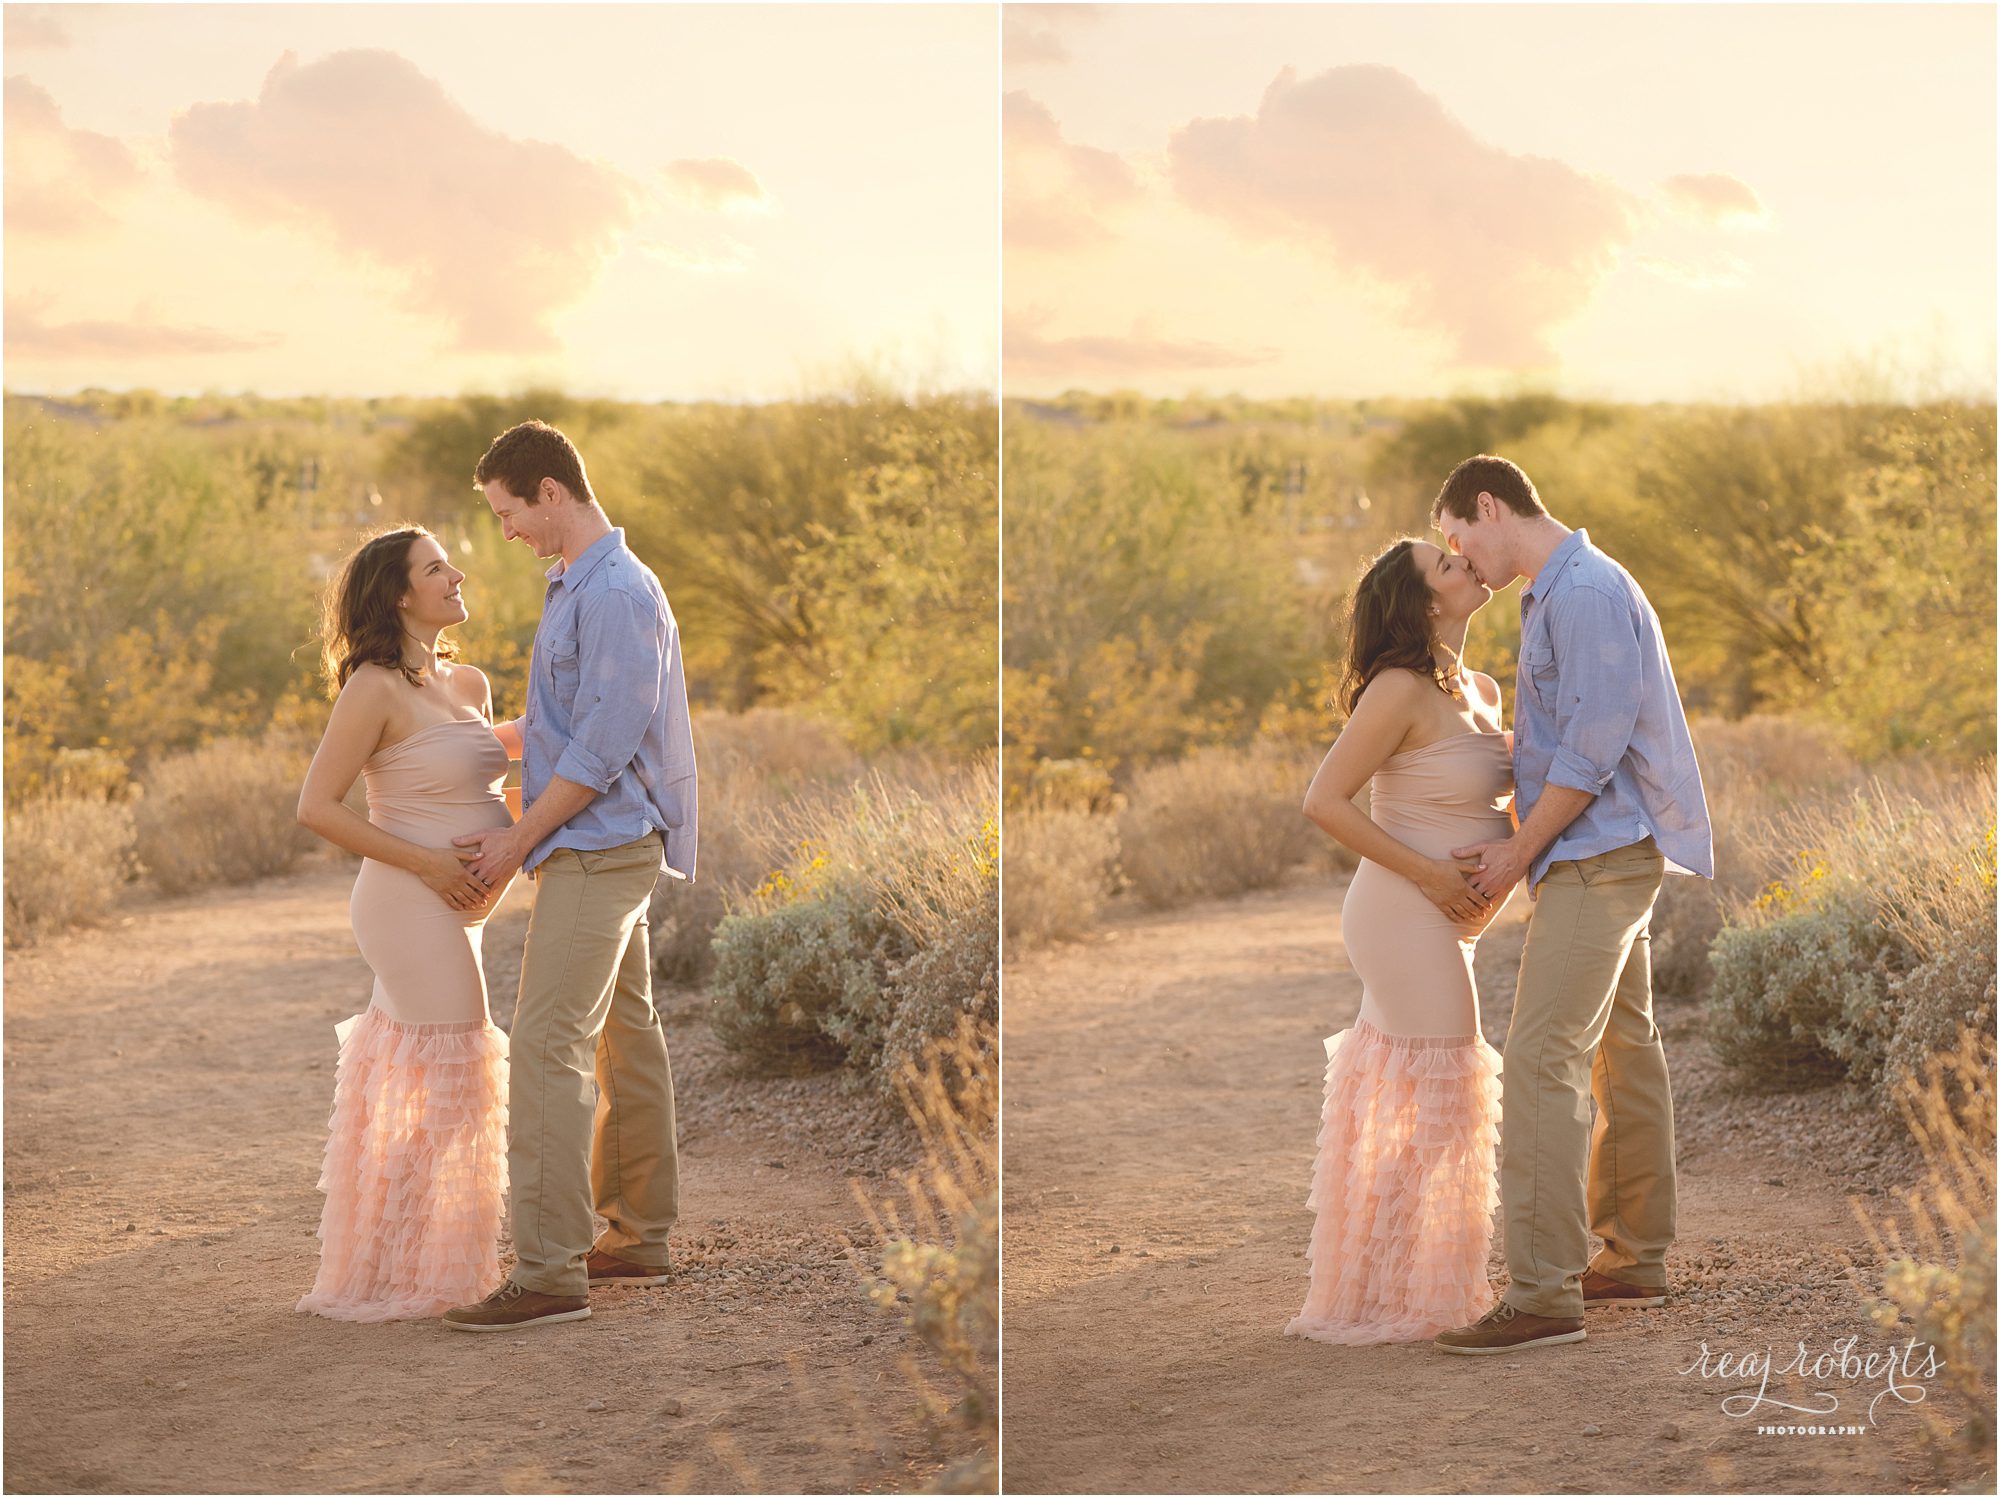 Gorgeous sunset maternity session | Reaj Roberts Photography